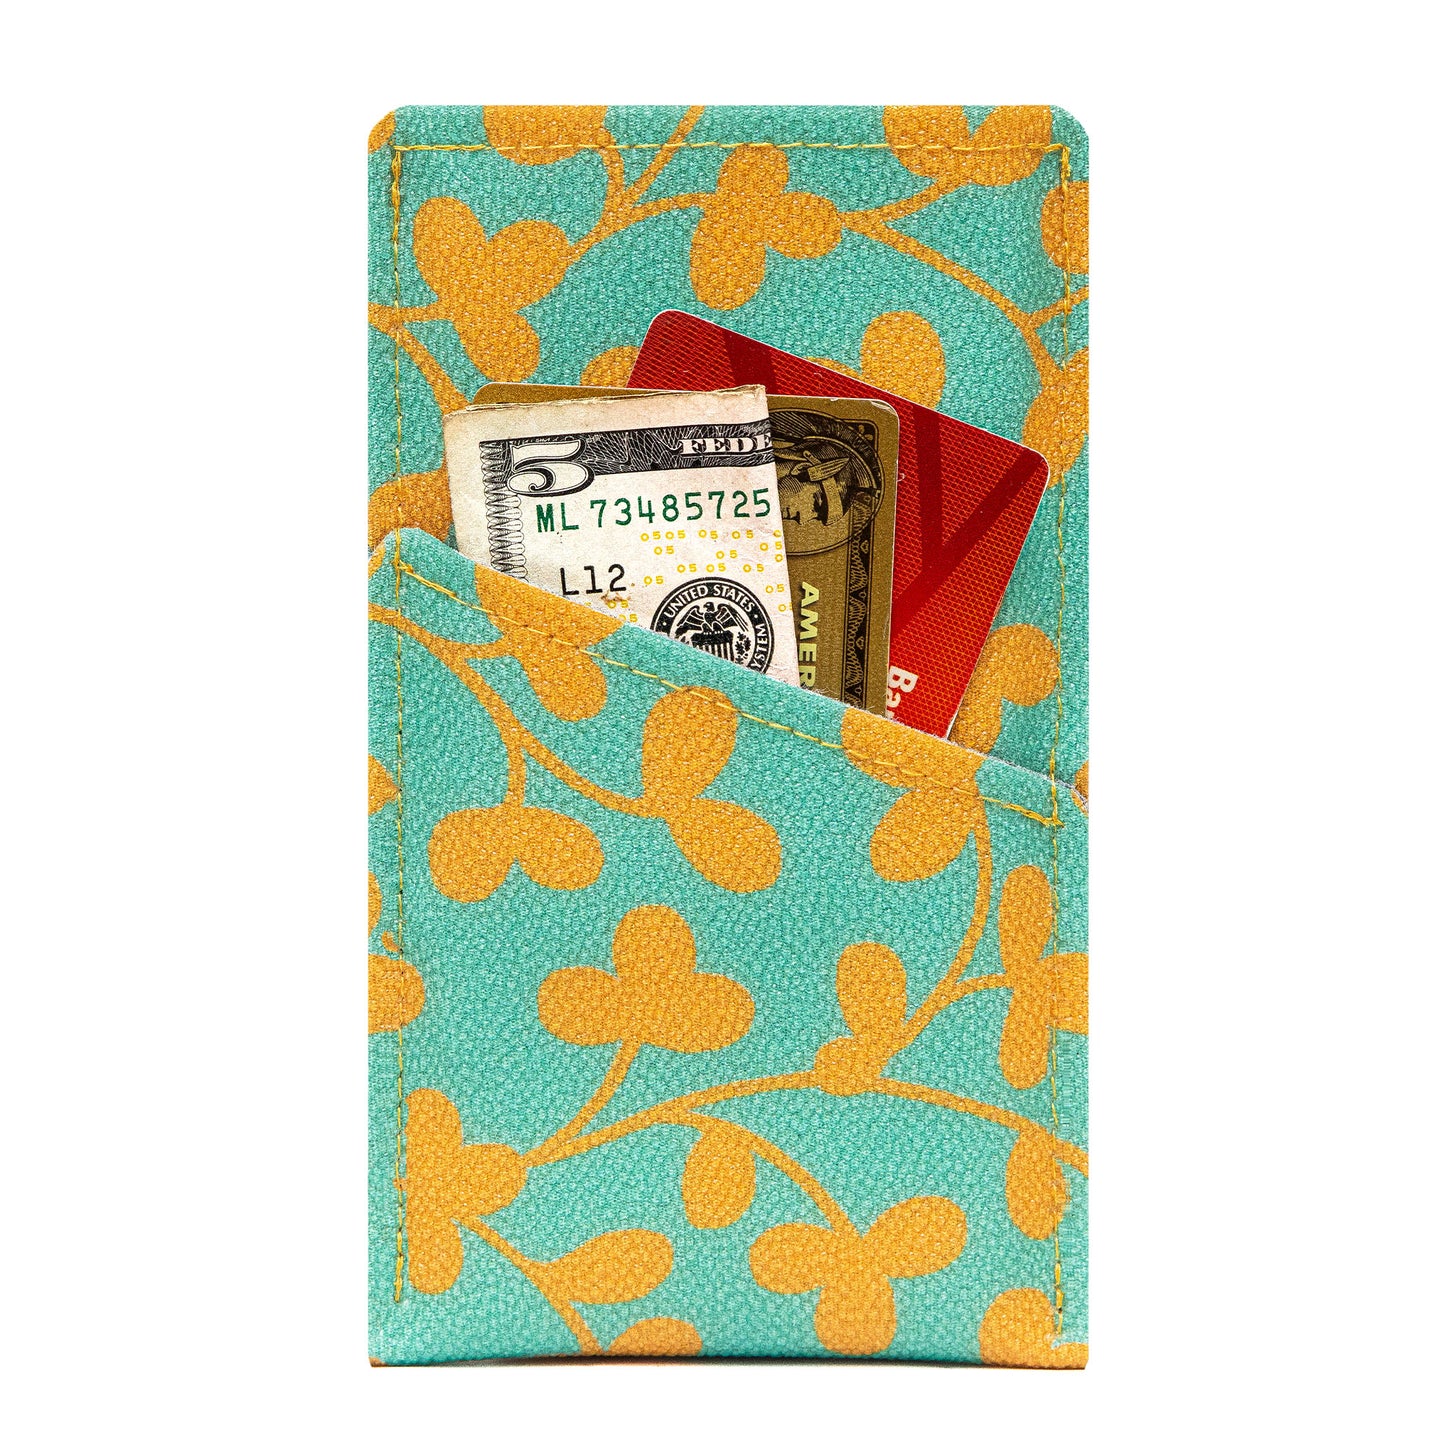 Modern Faux Leather iPhone Sleeve with Teal and Yellow Leaf Pattern Design and Card Pocket